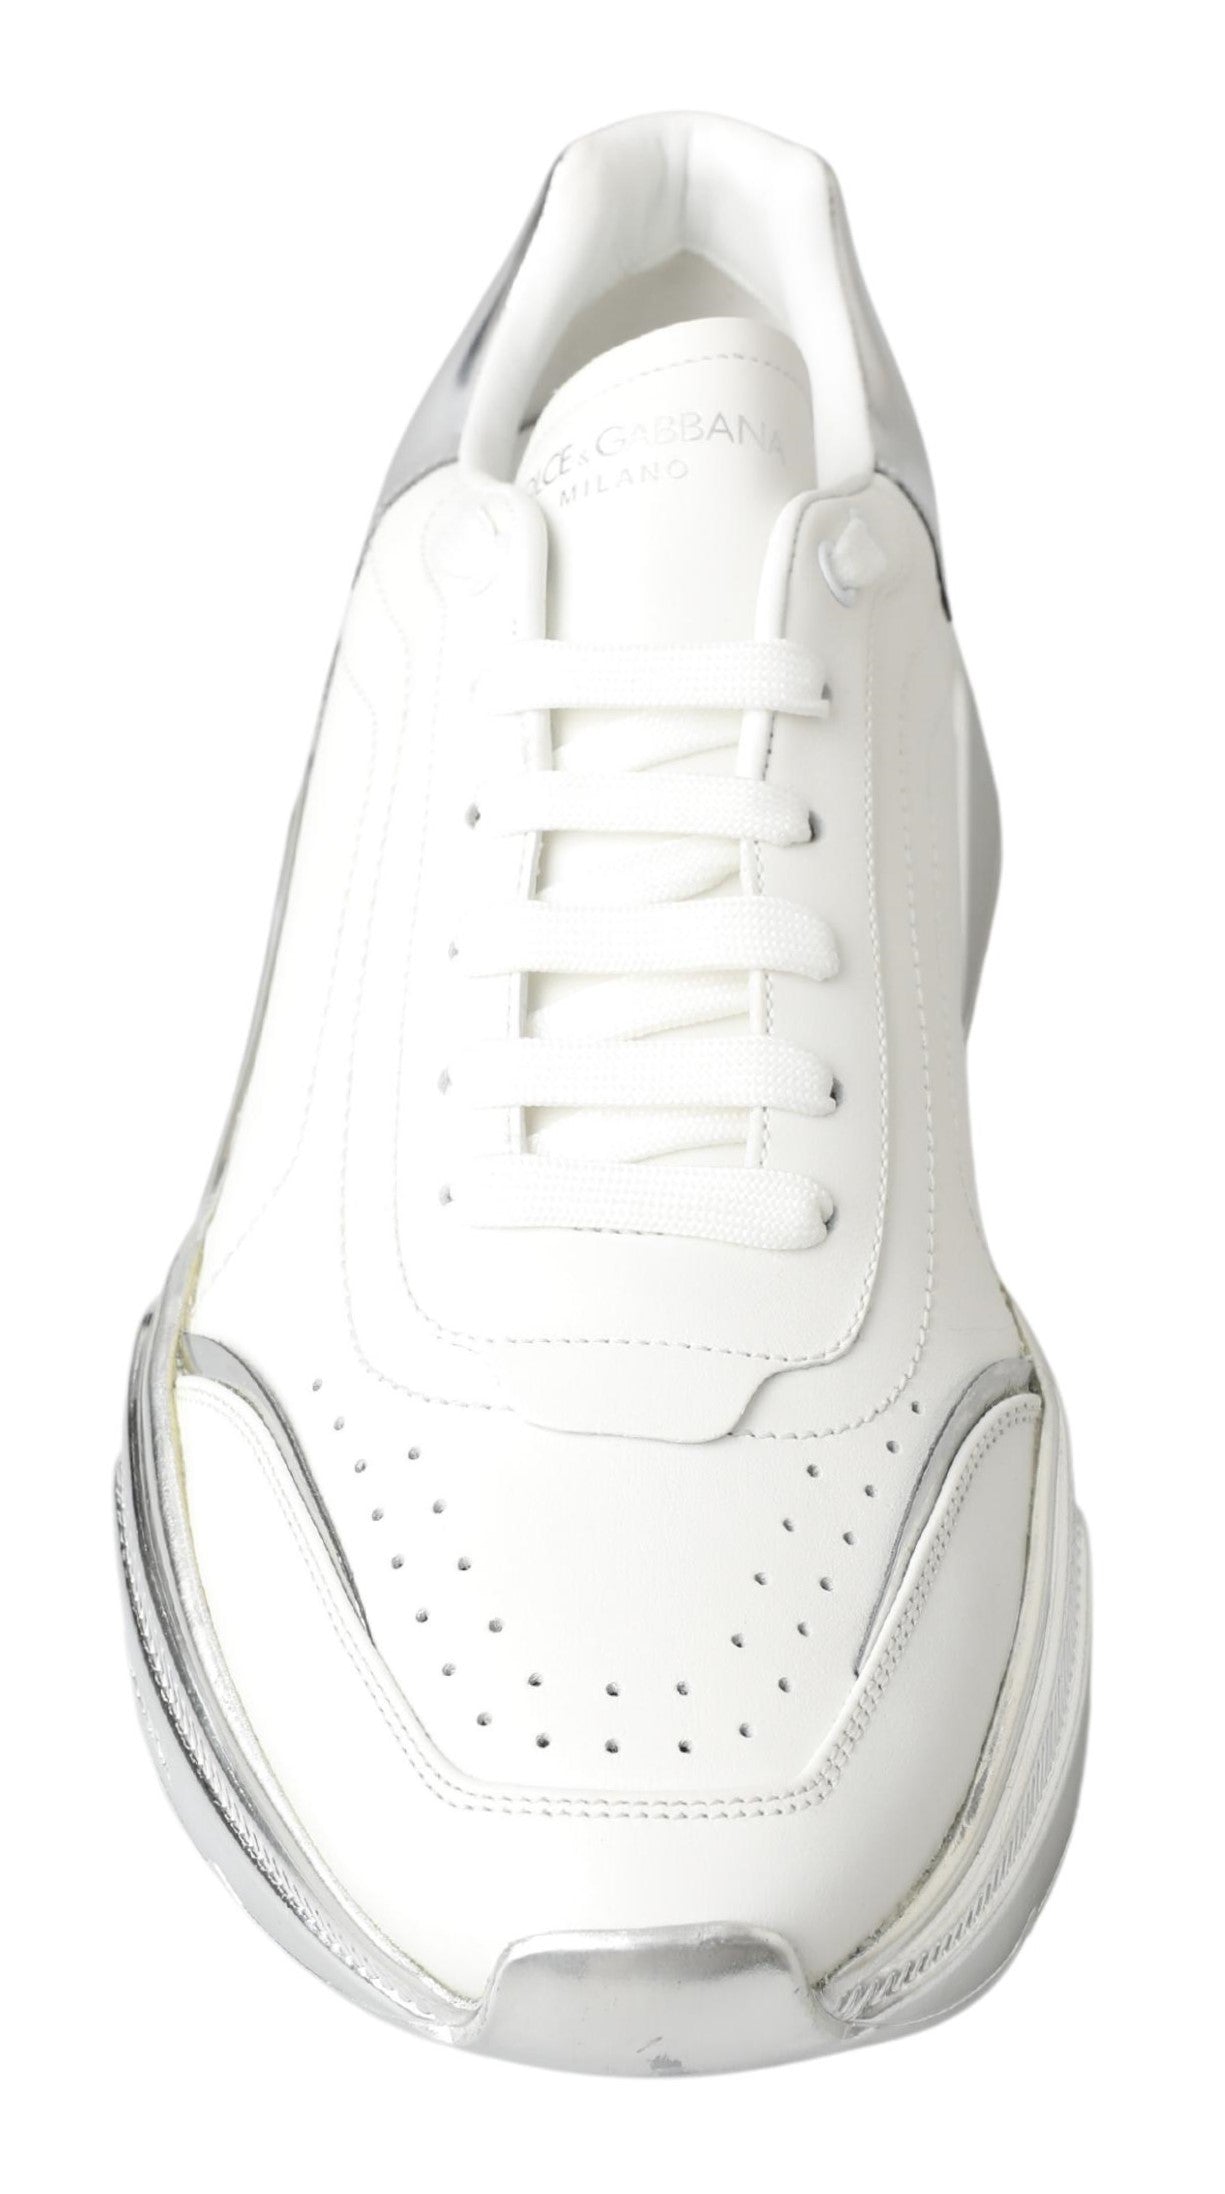 Dolce & Gabbana White Leather Sports DAYMASTER Sneakers Shoes